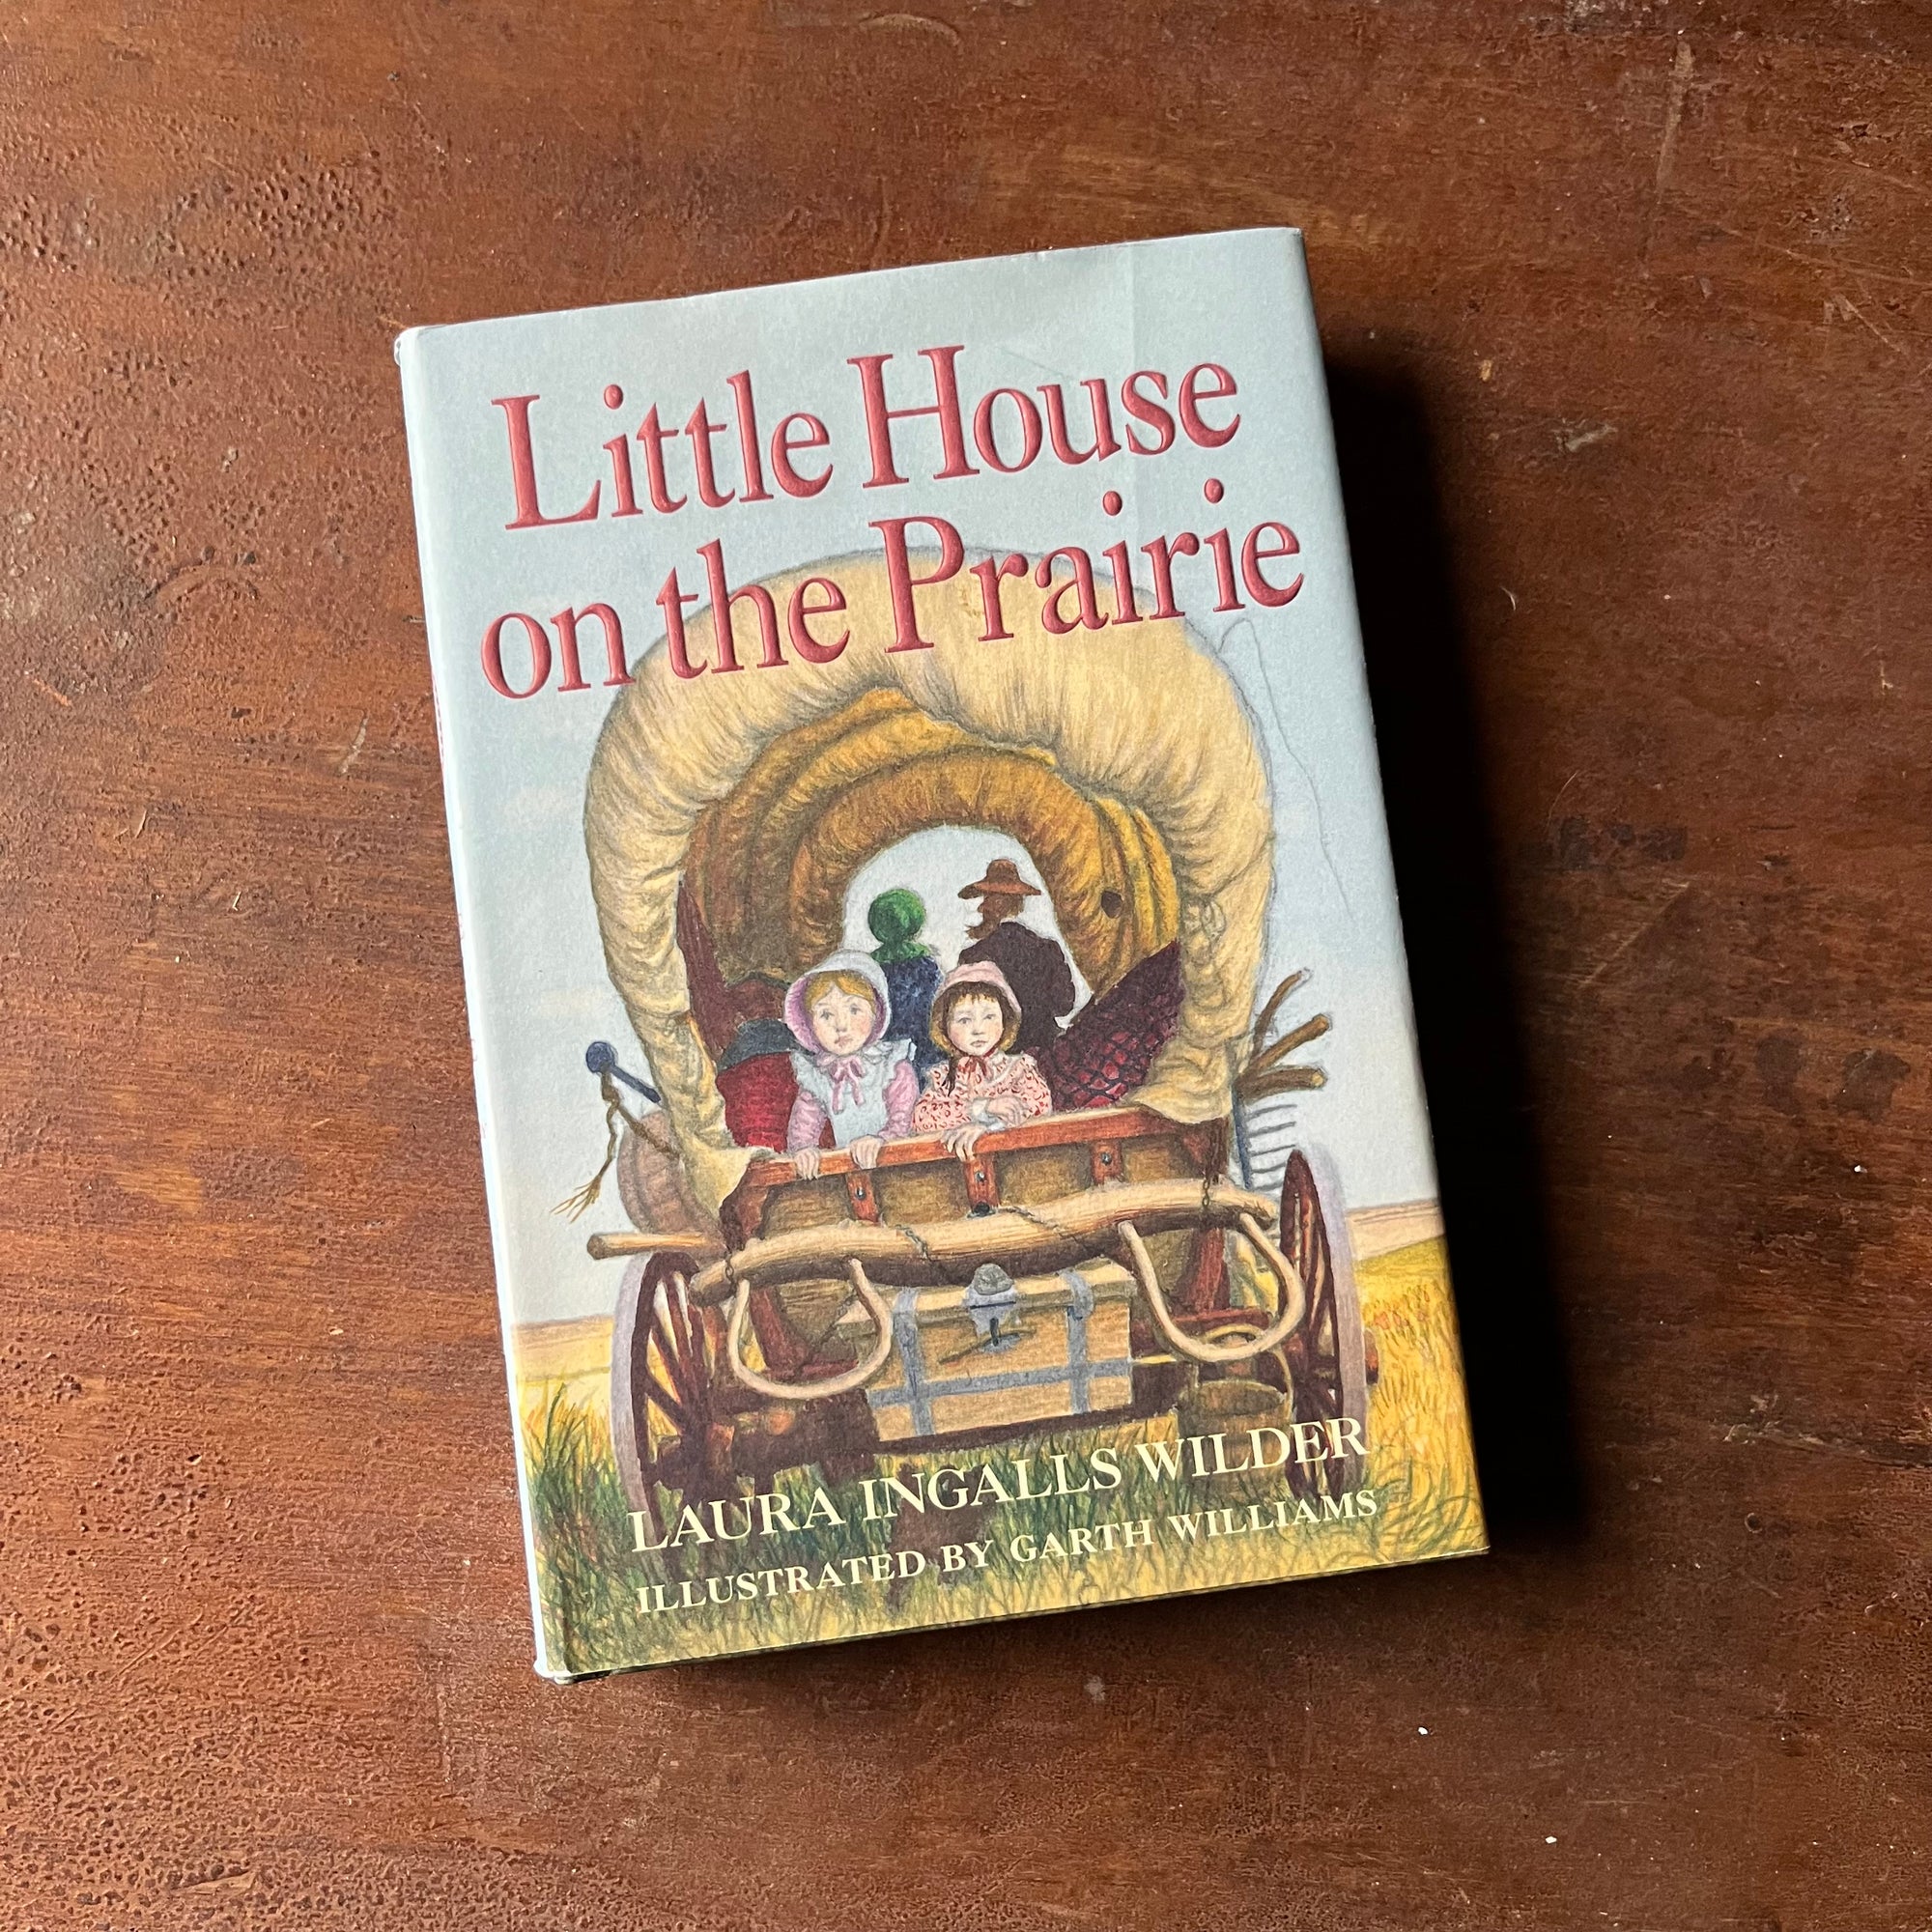 Log Cabin Vintage – vintage children’s book, children’s book, chapter book, living history - Little House on the Prairie 75th Anniversary Edition by Laura Ingalls Wilder with Illustrations by Garth Williams – view of the dust jacket's front cover with the iconic illustration of Luara & Mary sitting in the back of the covered wagon